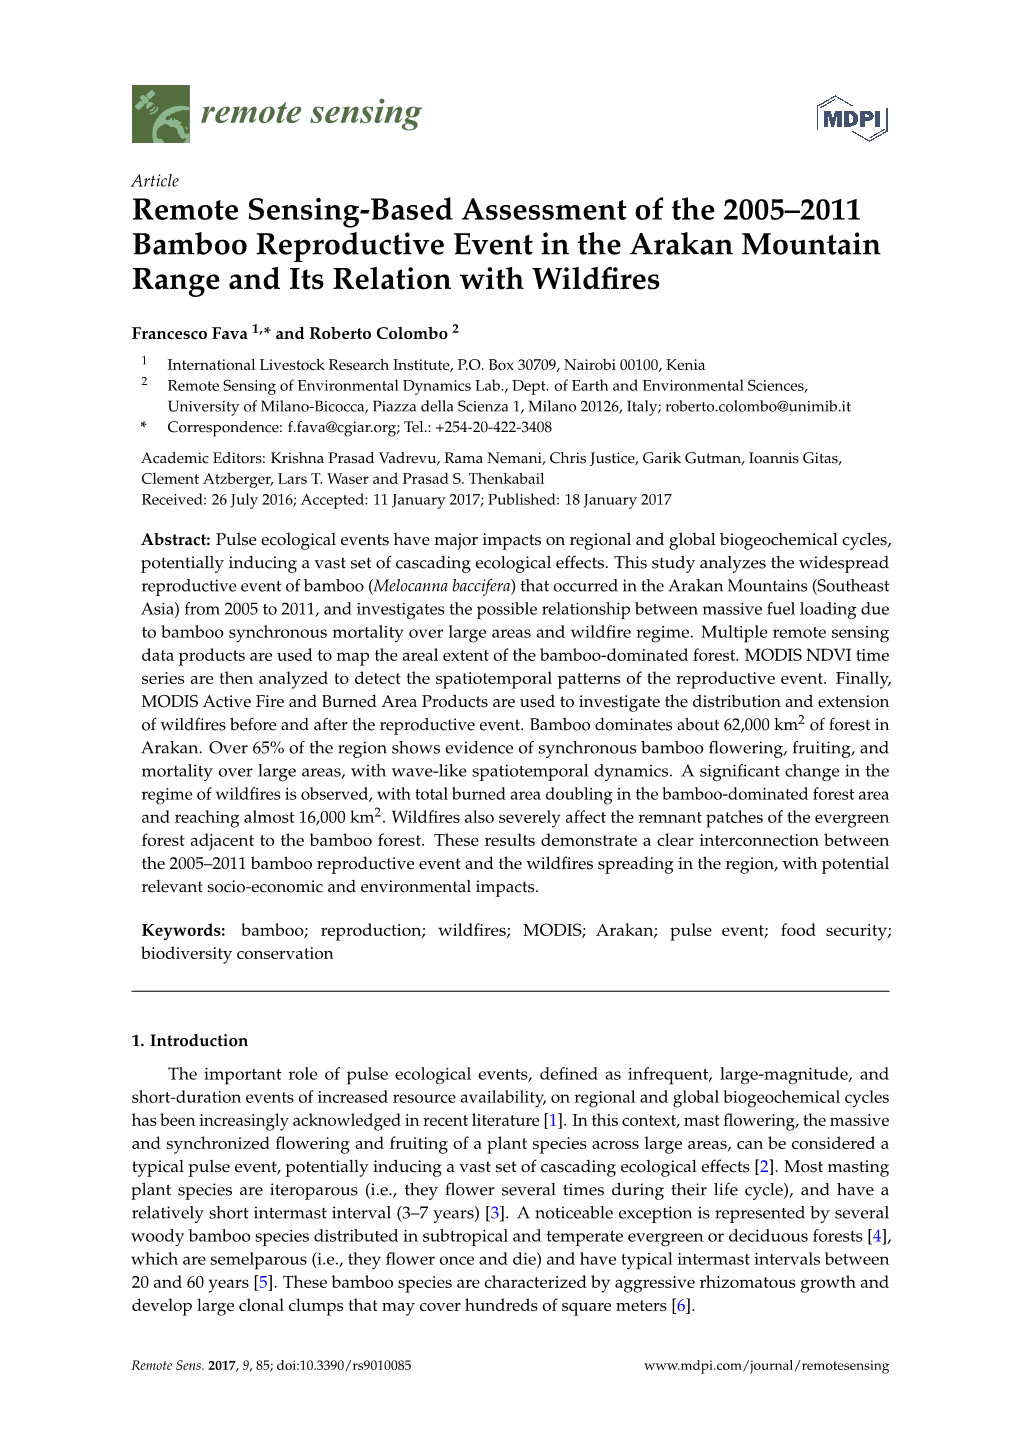 Remote Sensing-Based Assessment of the 2005–2011 Bamboo Reproductive Event in the Arakan Mountain Range and Its Relation with Wildﬁres